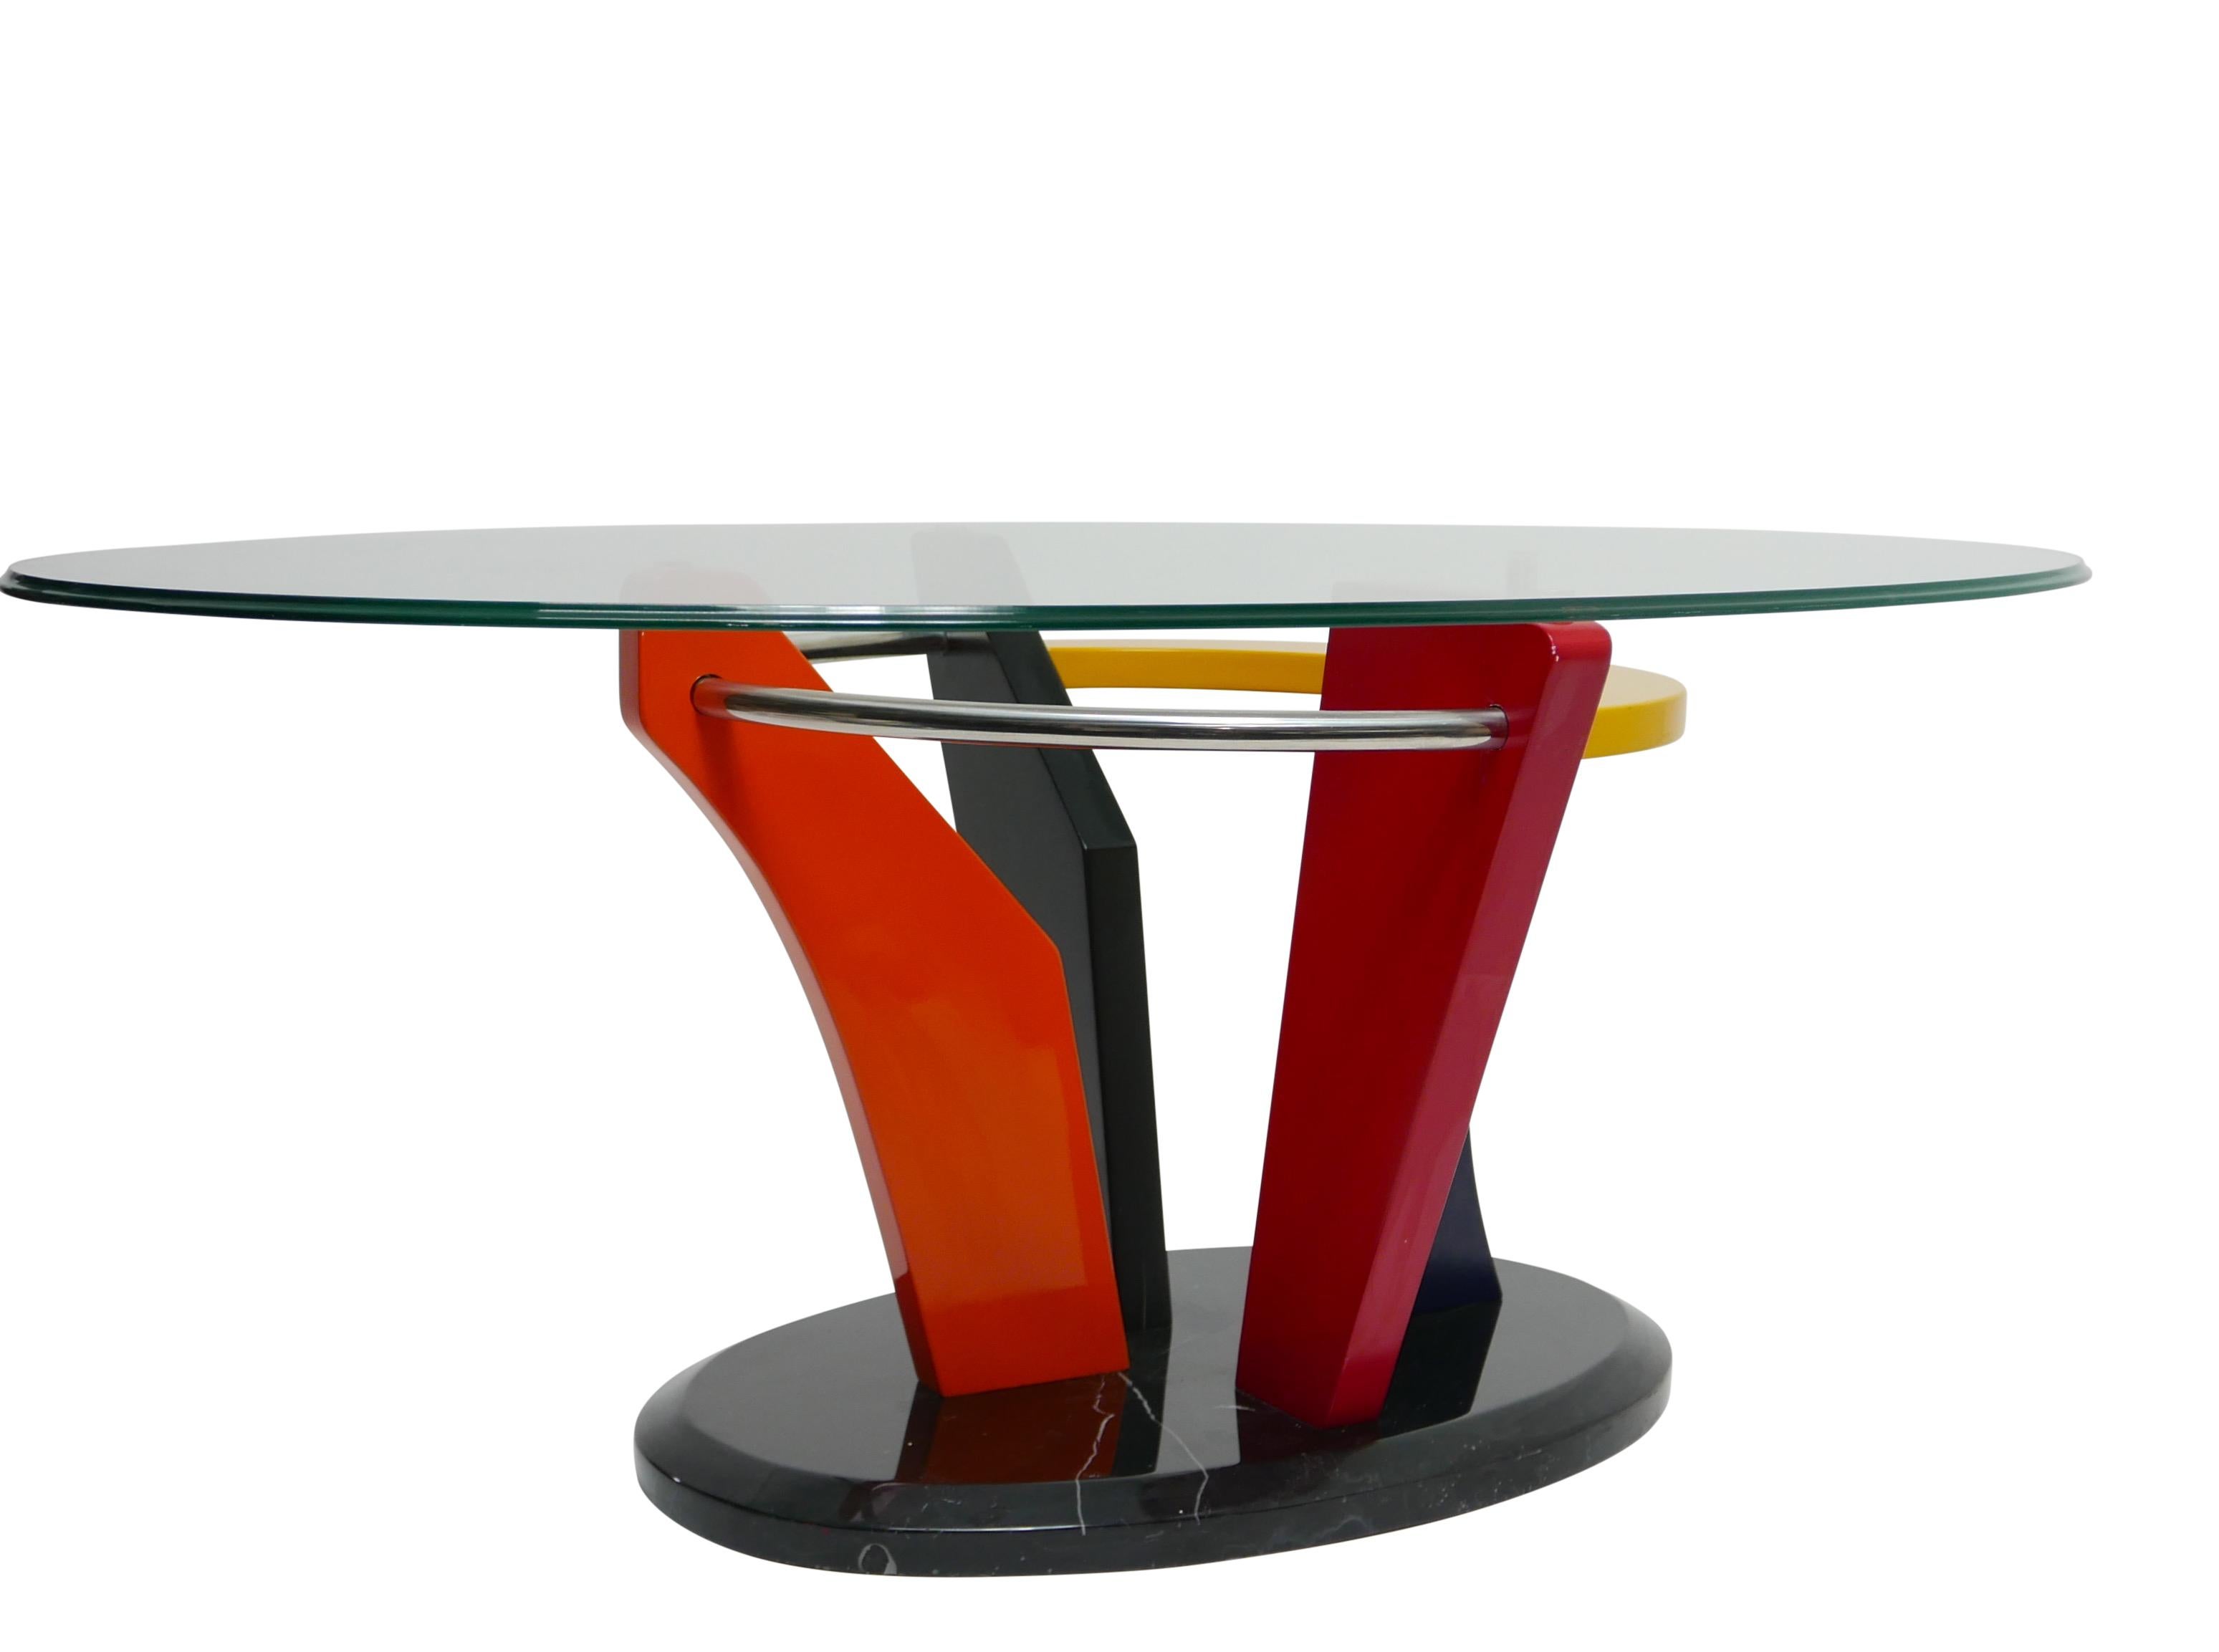 Very vibrant and bold Memphis lacquered and polished marble base with oval glass top coffee table, Completely intact and original, glass top has some light scratches, no chips. American, Circa 1980's.
This is not a Peter Shire, but is very similar.